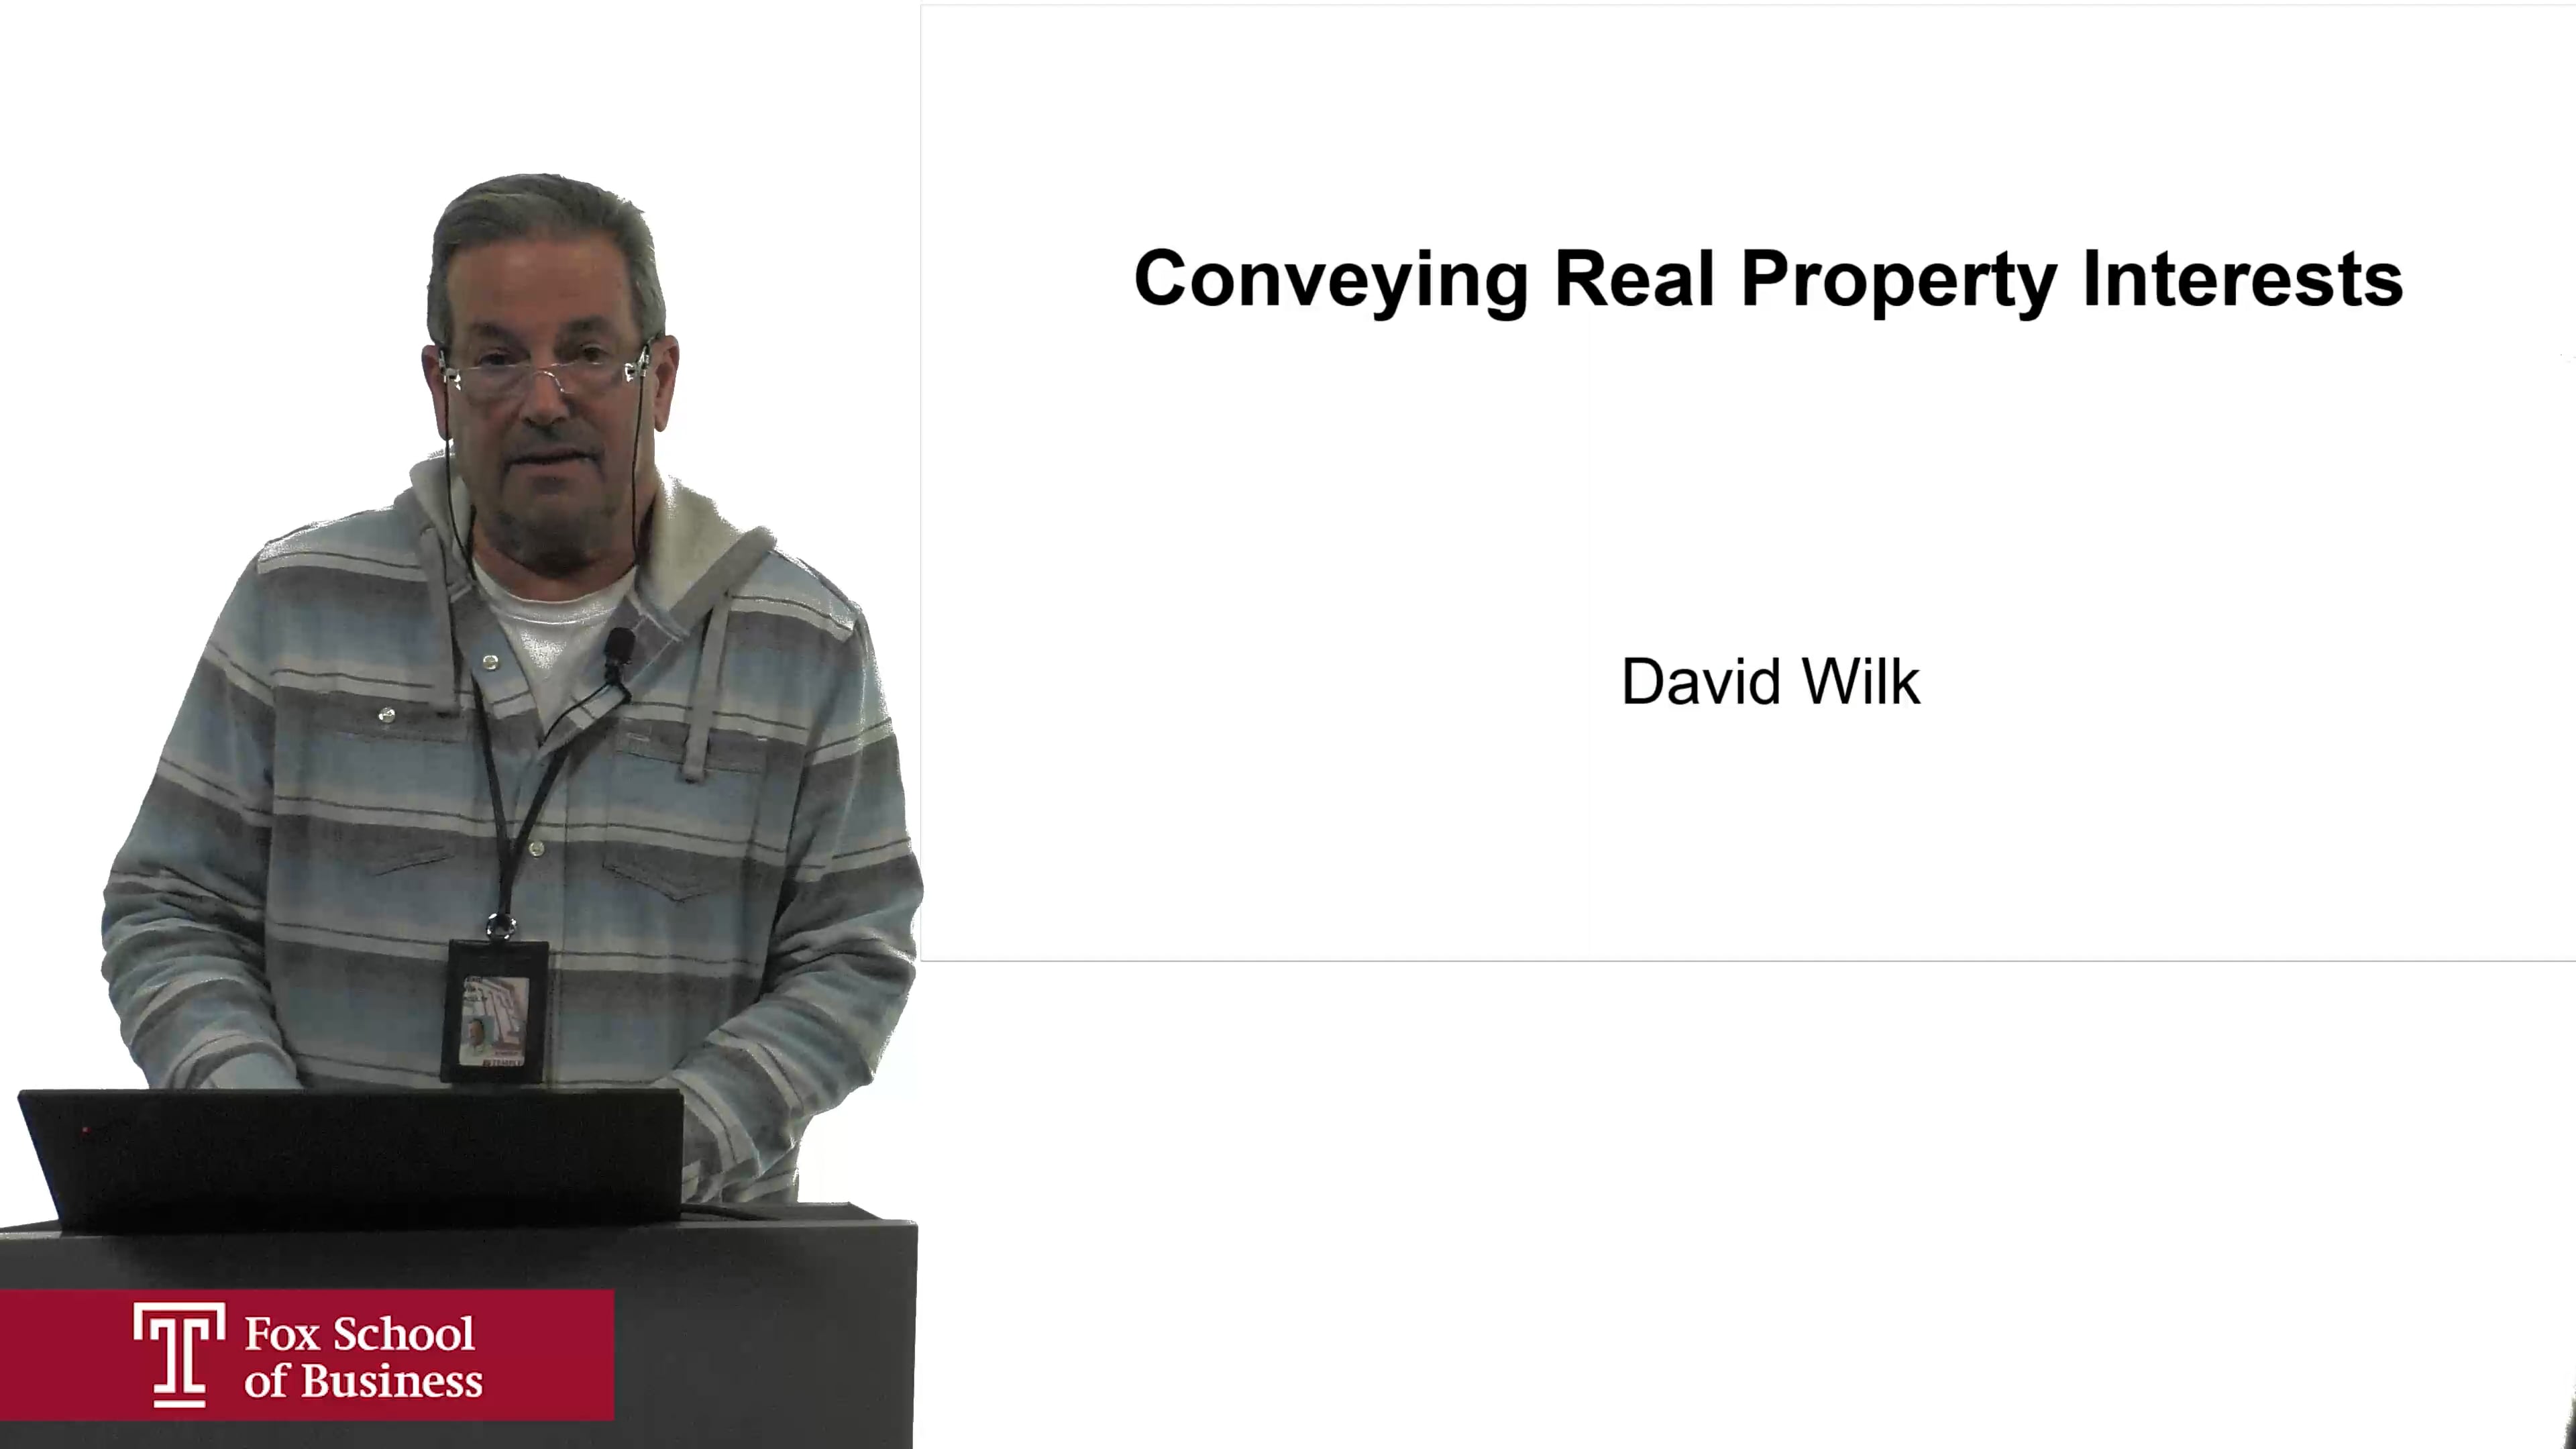 Conveying Real Property Interests